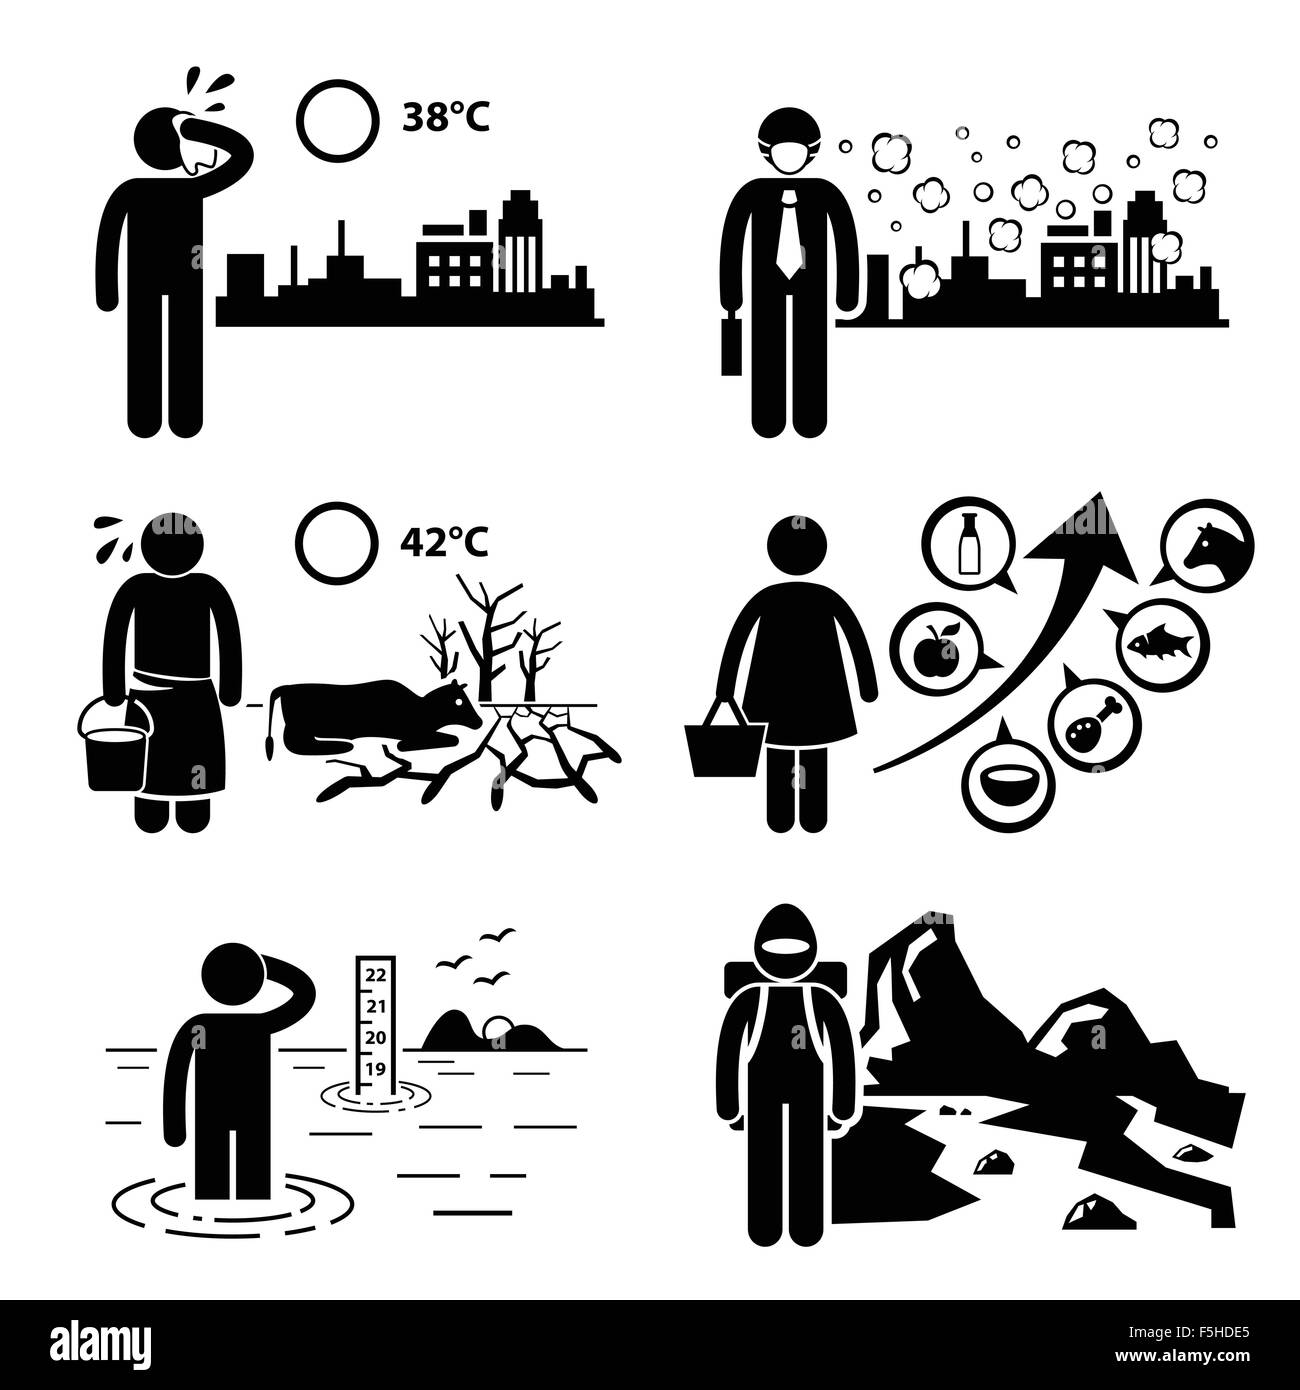 Global Warming Greenhouse Effects Stick Figure Pictogram Icons Cliparts Stock Vector